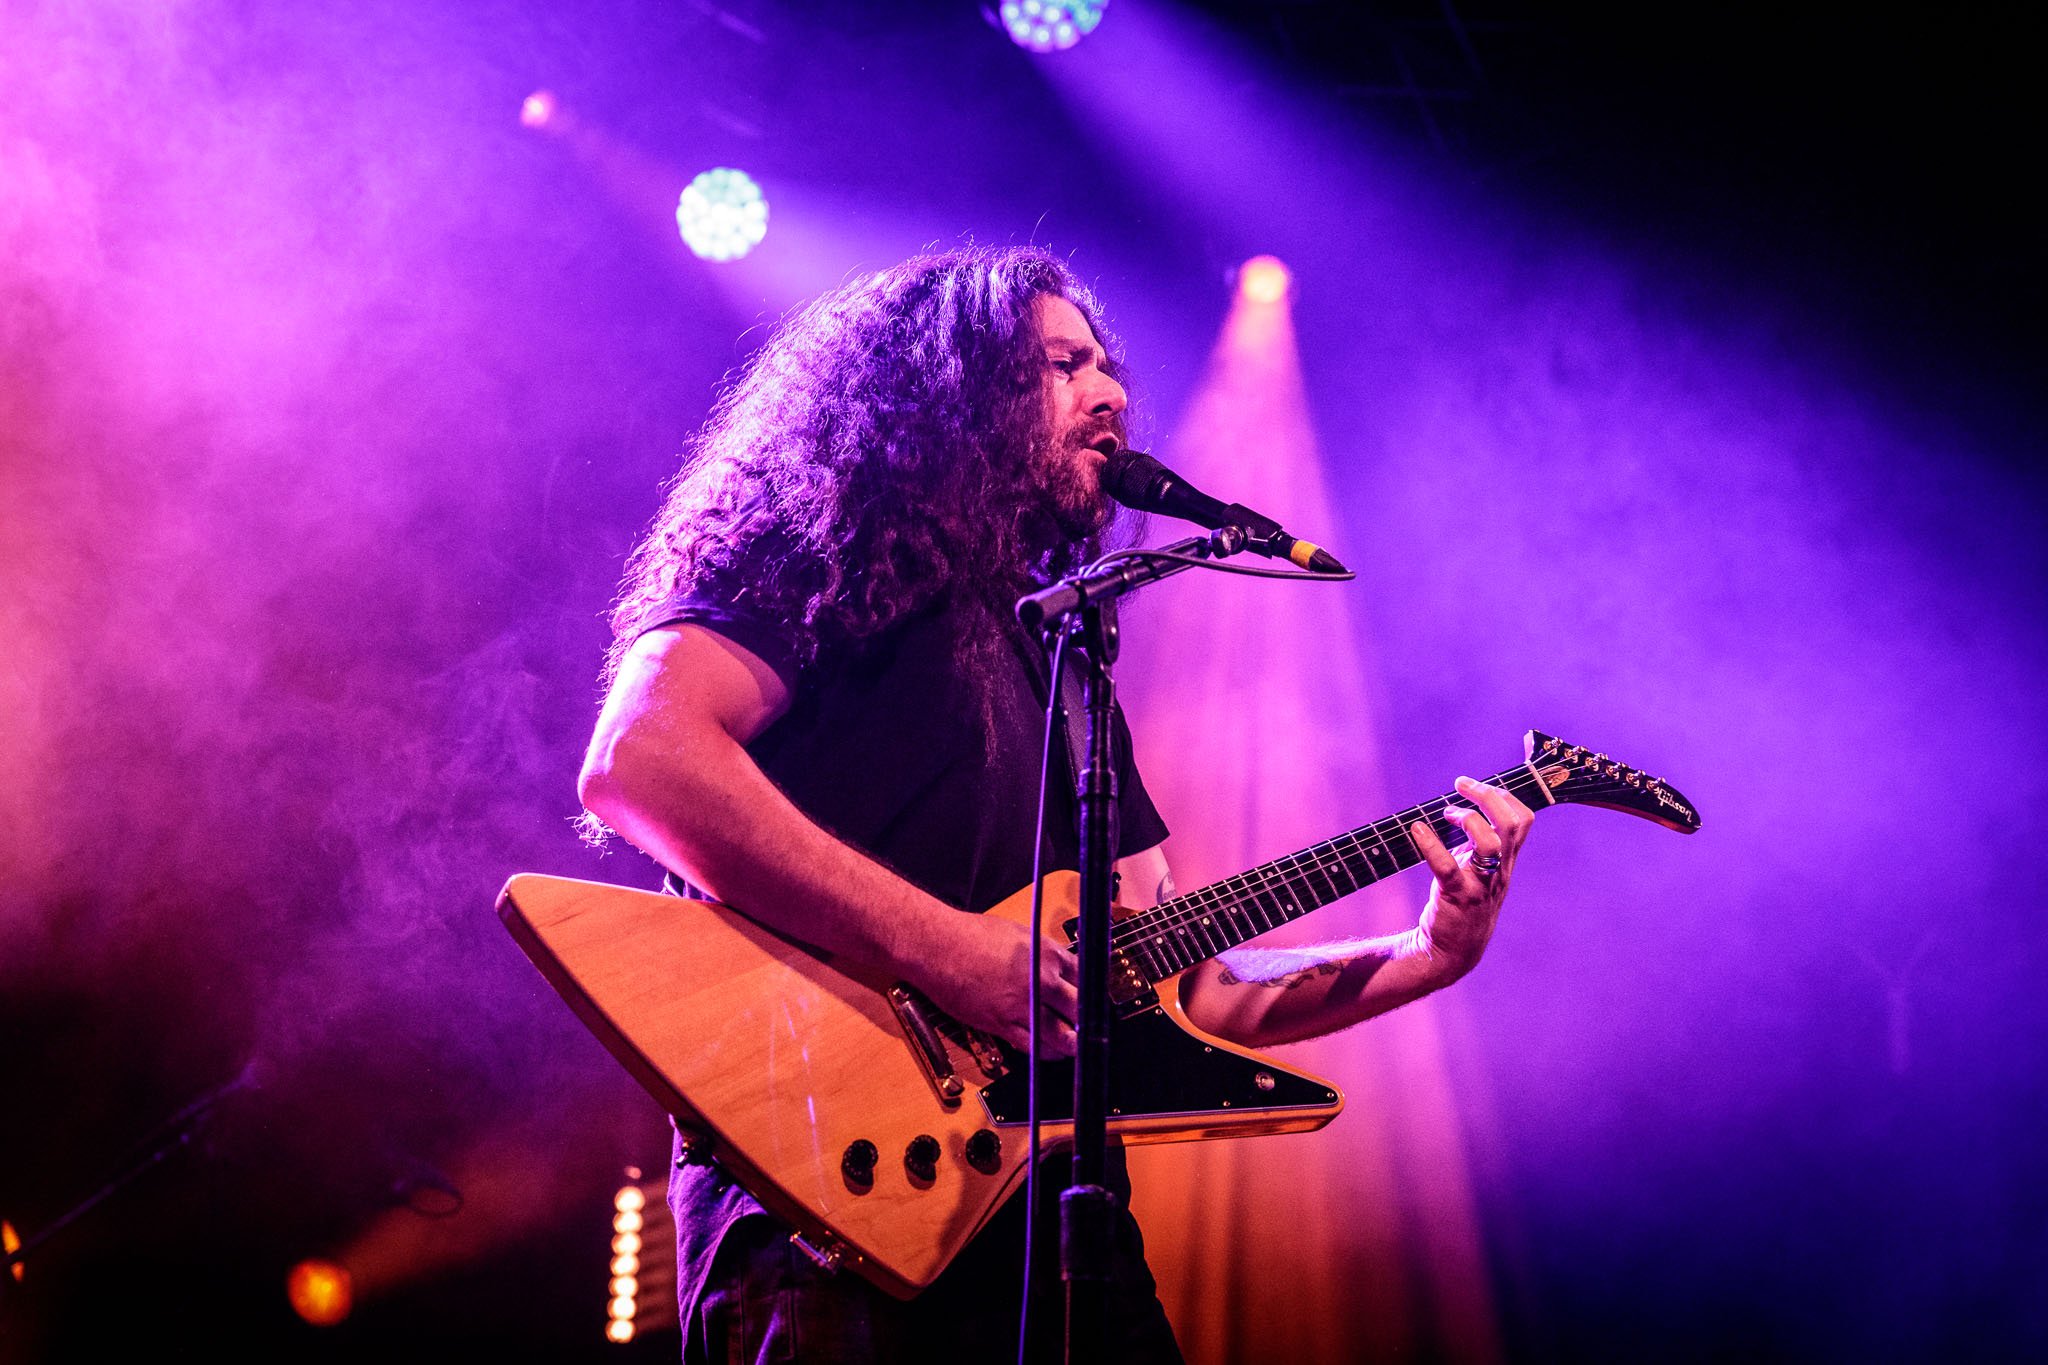 Coheed and Cambria at the Academy in Manchester on October 18th 